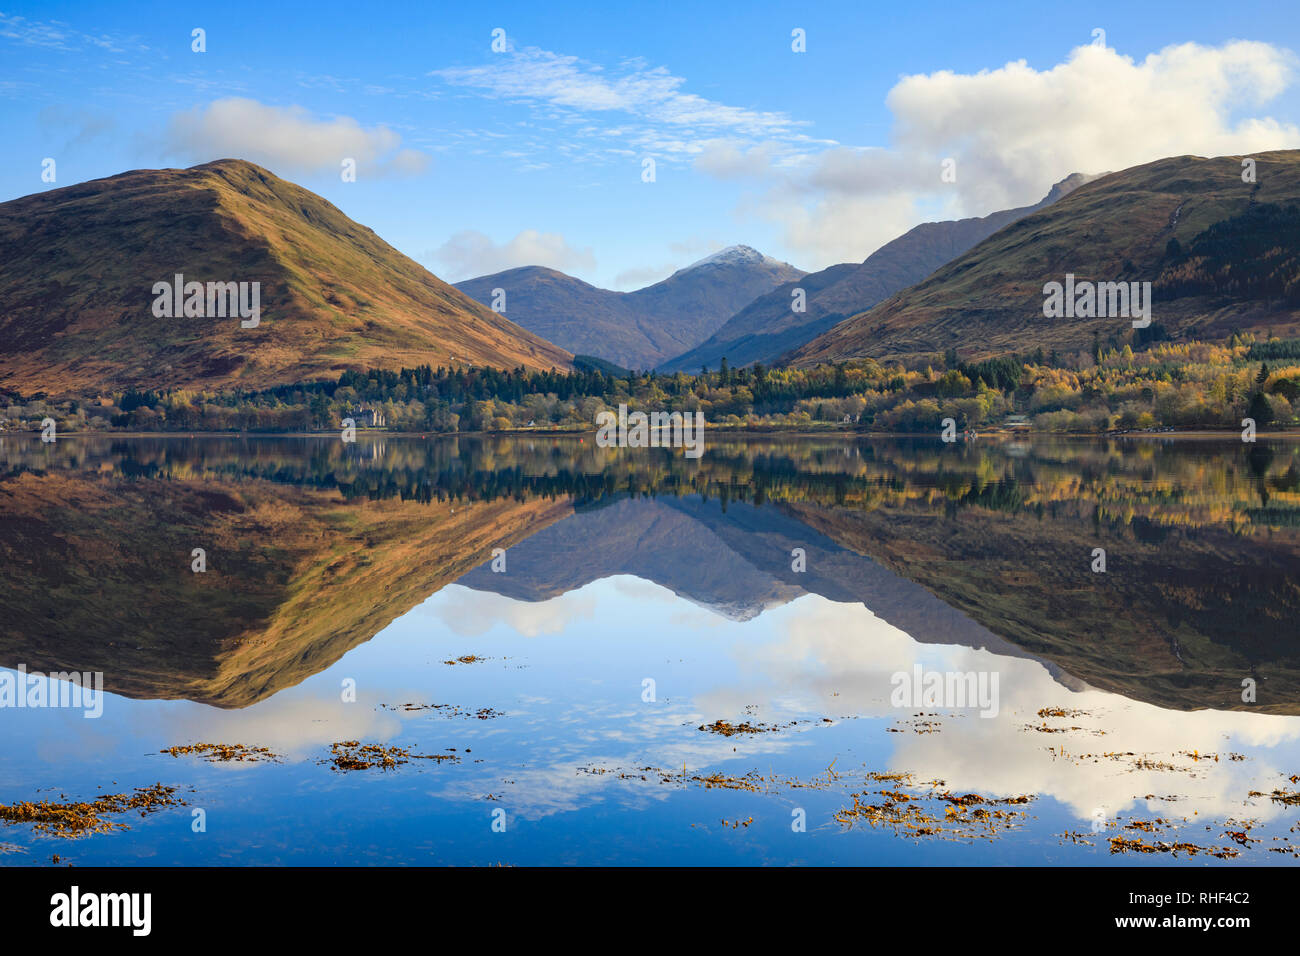 The Arrochar Alps in the Loch Lomond and Trossachs National Park reflected in Loch Fyne. Stock Photo